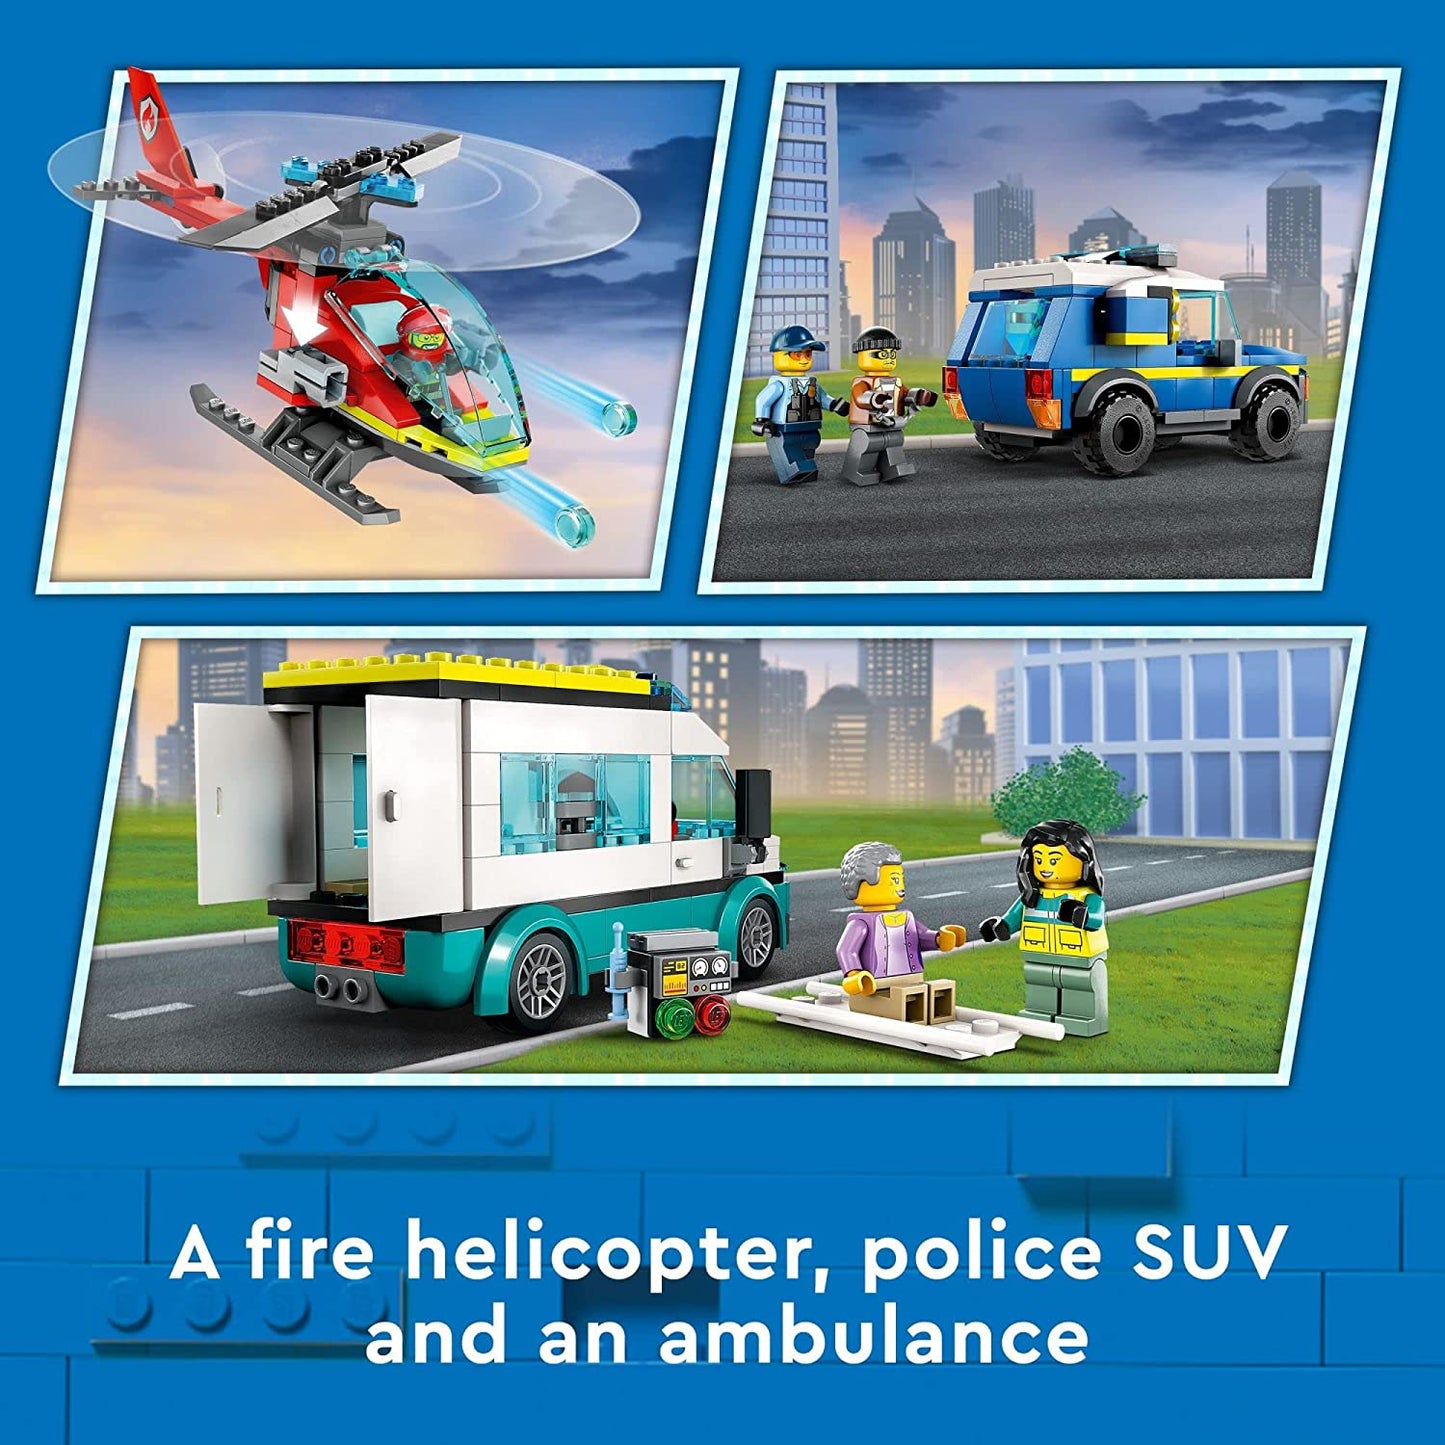 LEGO City Emergency Vehicles HQ - 706 Pieces (60371)